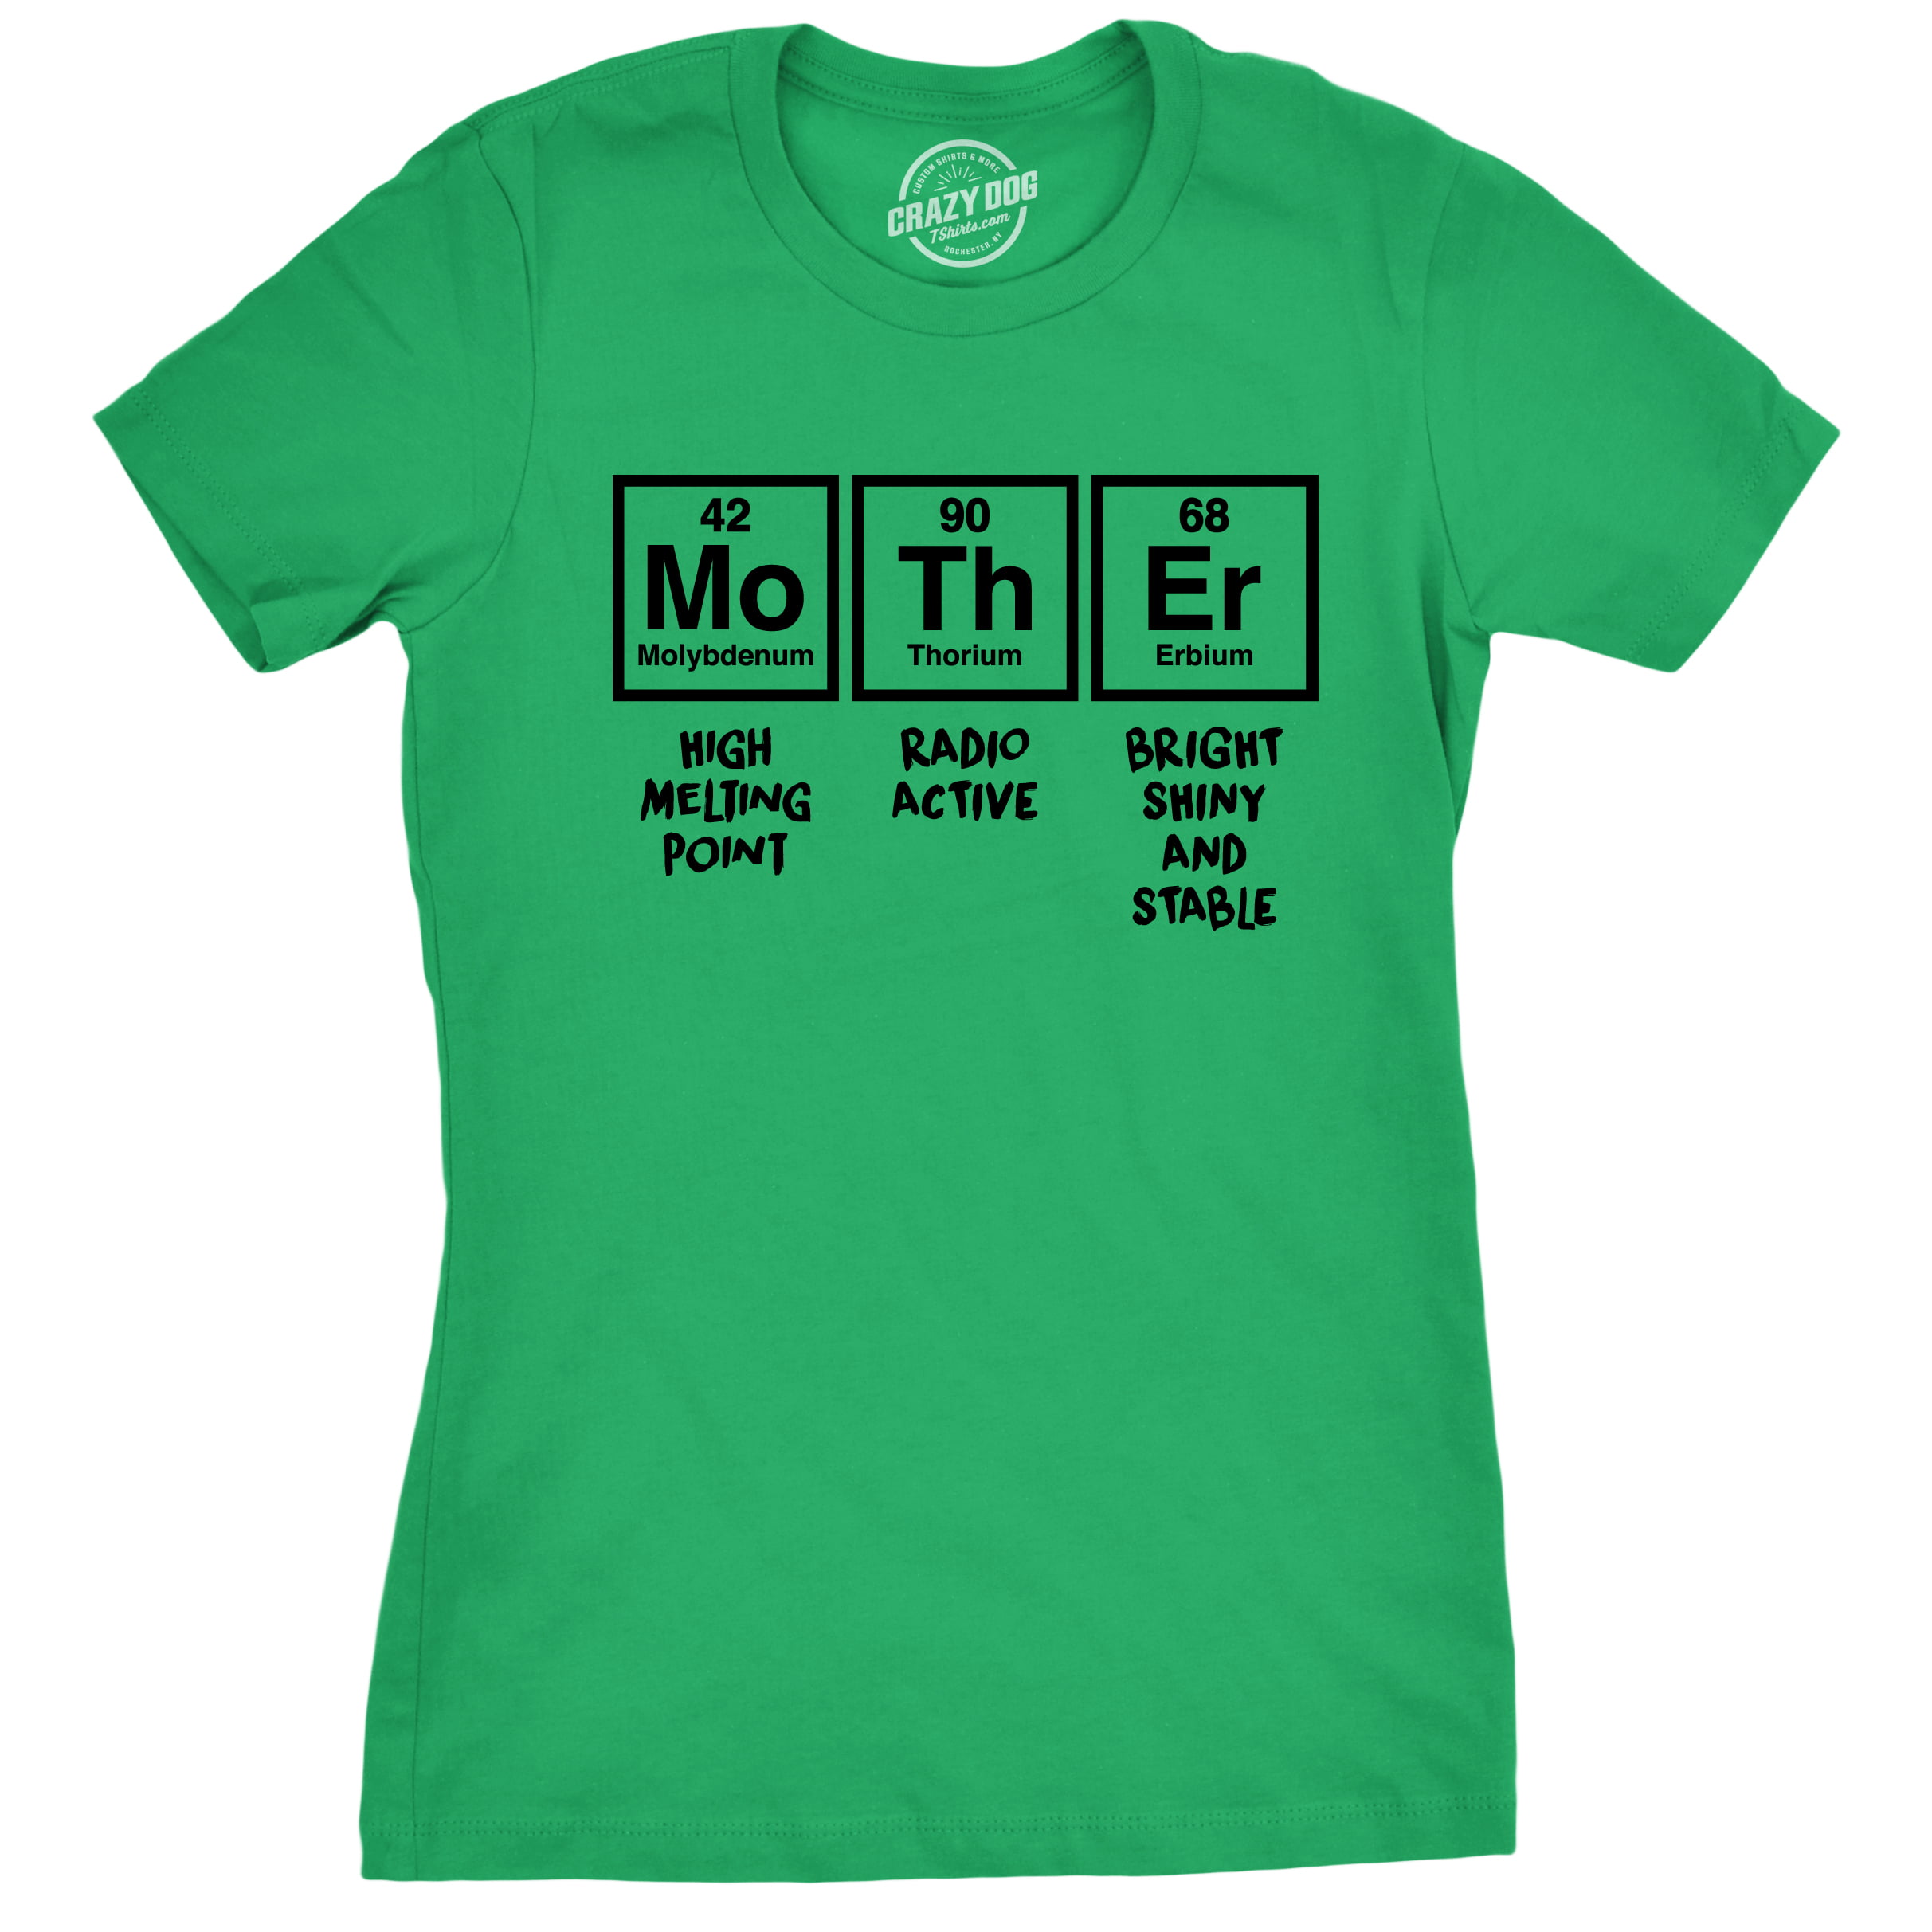 Funny Mom Shirt Mother Shirt Mothers Day Gift Mom Shirt Funny Womens Mother Periodic Table T shirt Funny Shirt For Moms